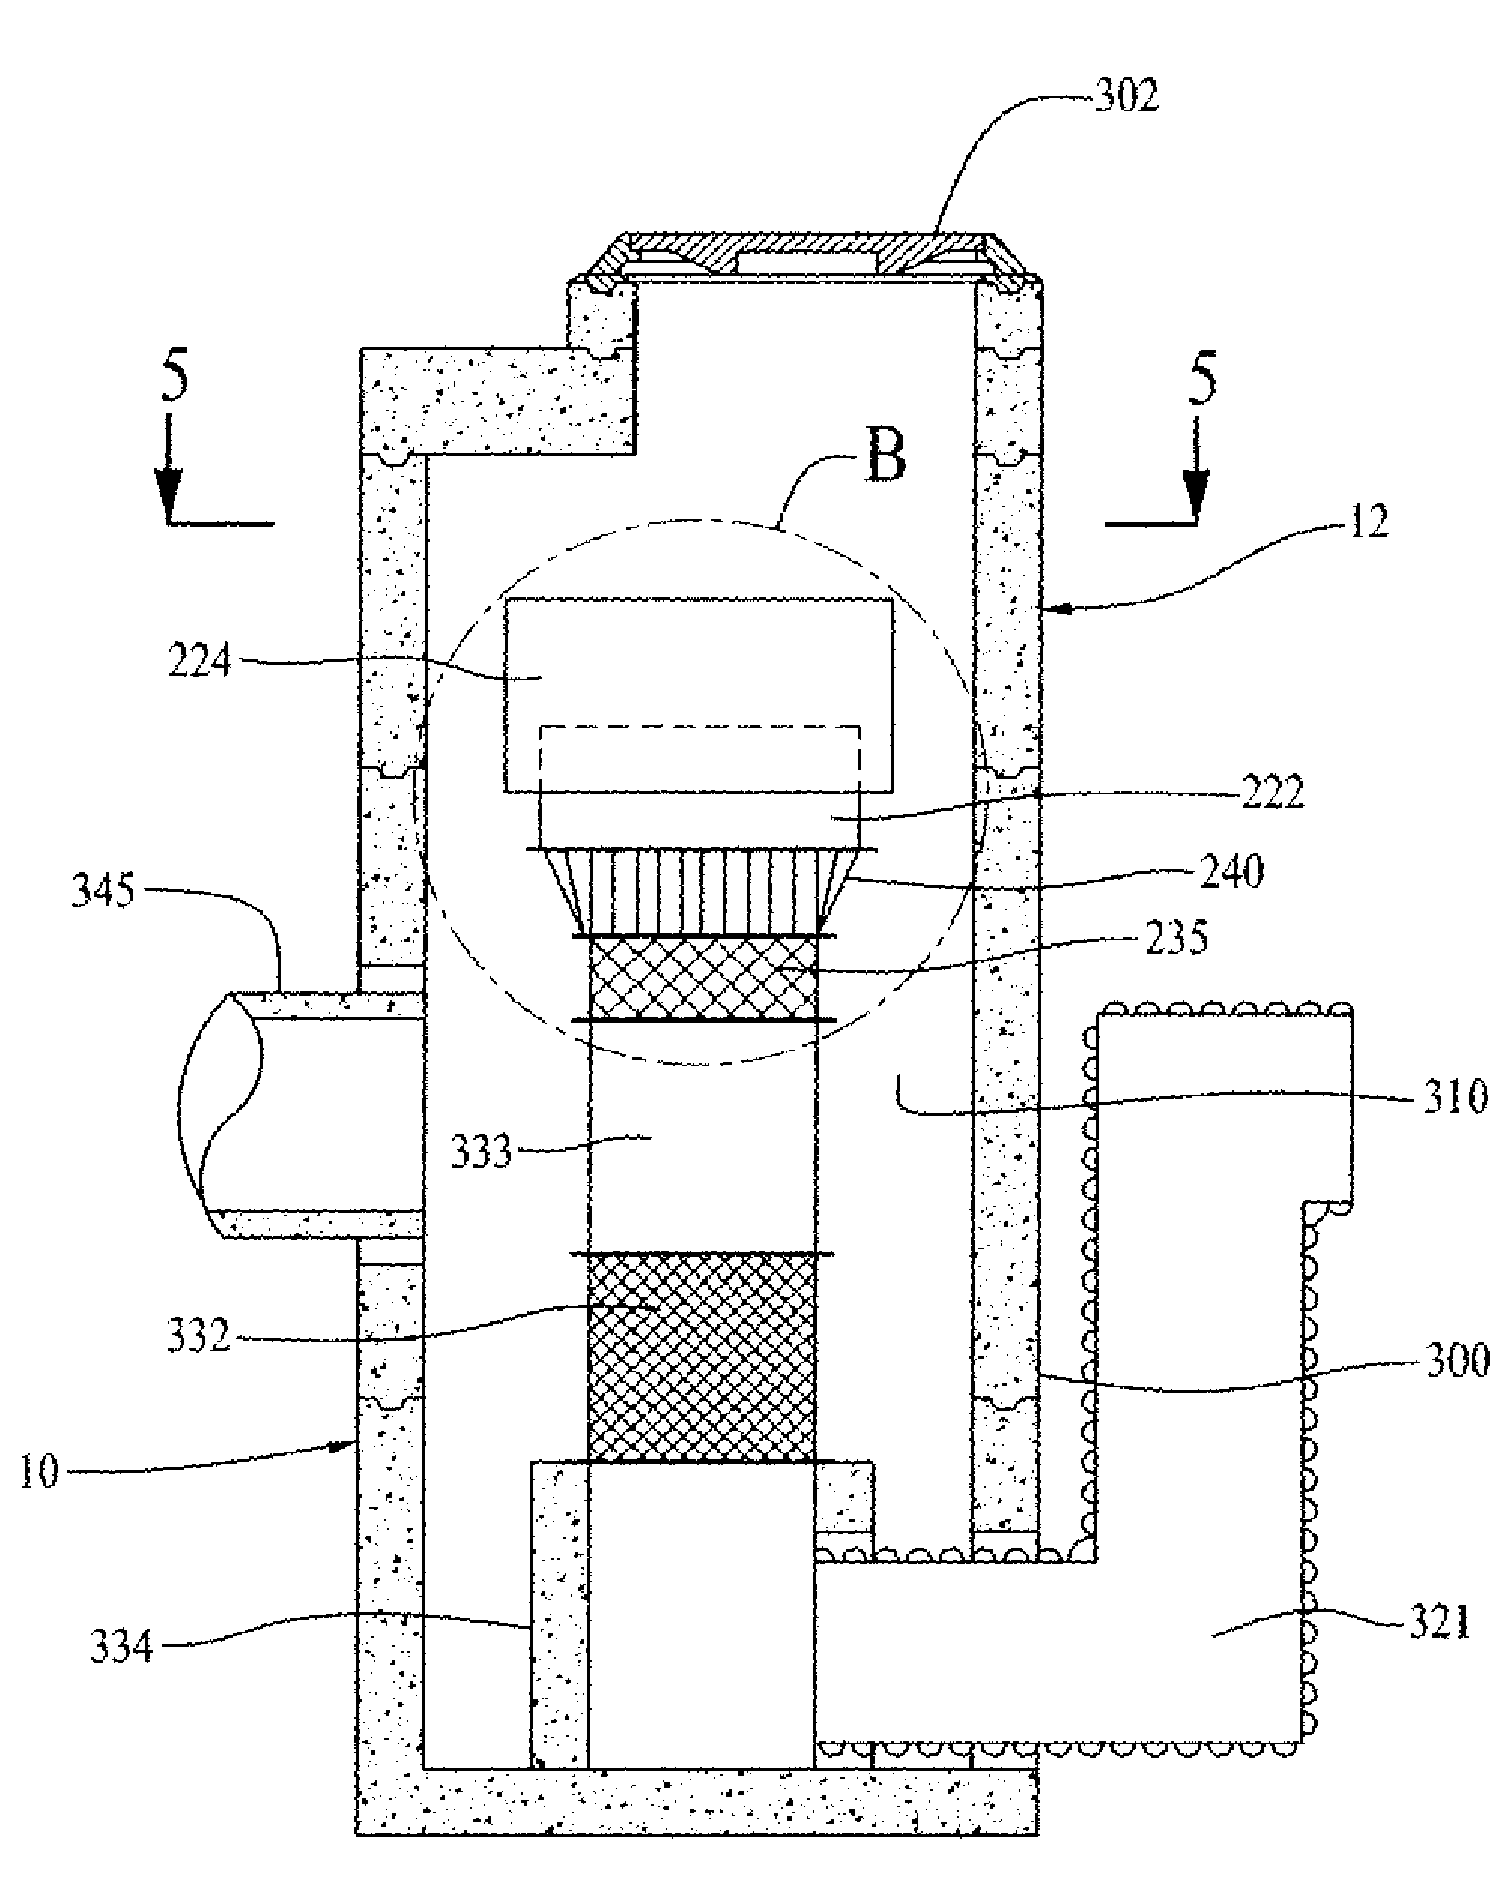 Fluid stream hydrodynamic separator with high flow bypass